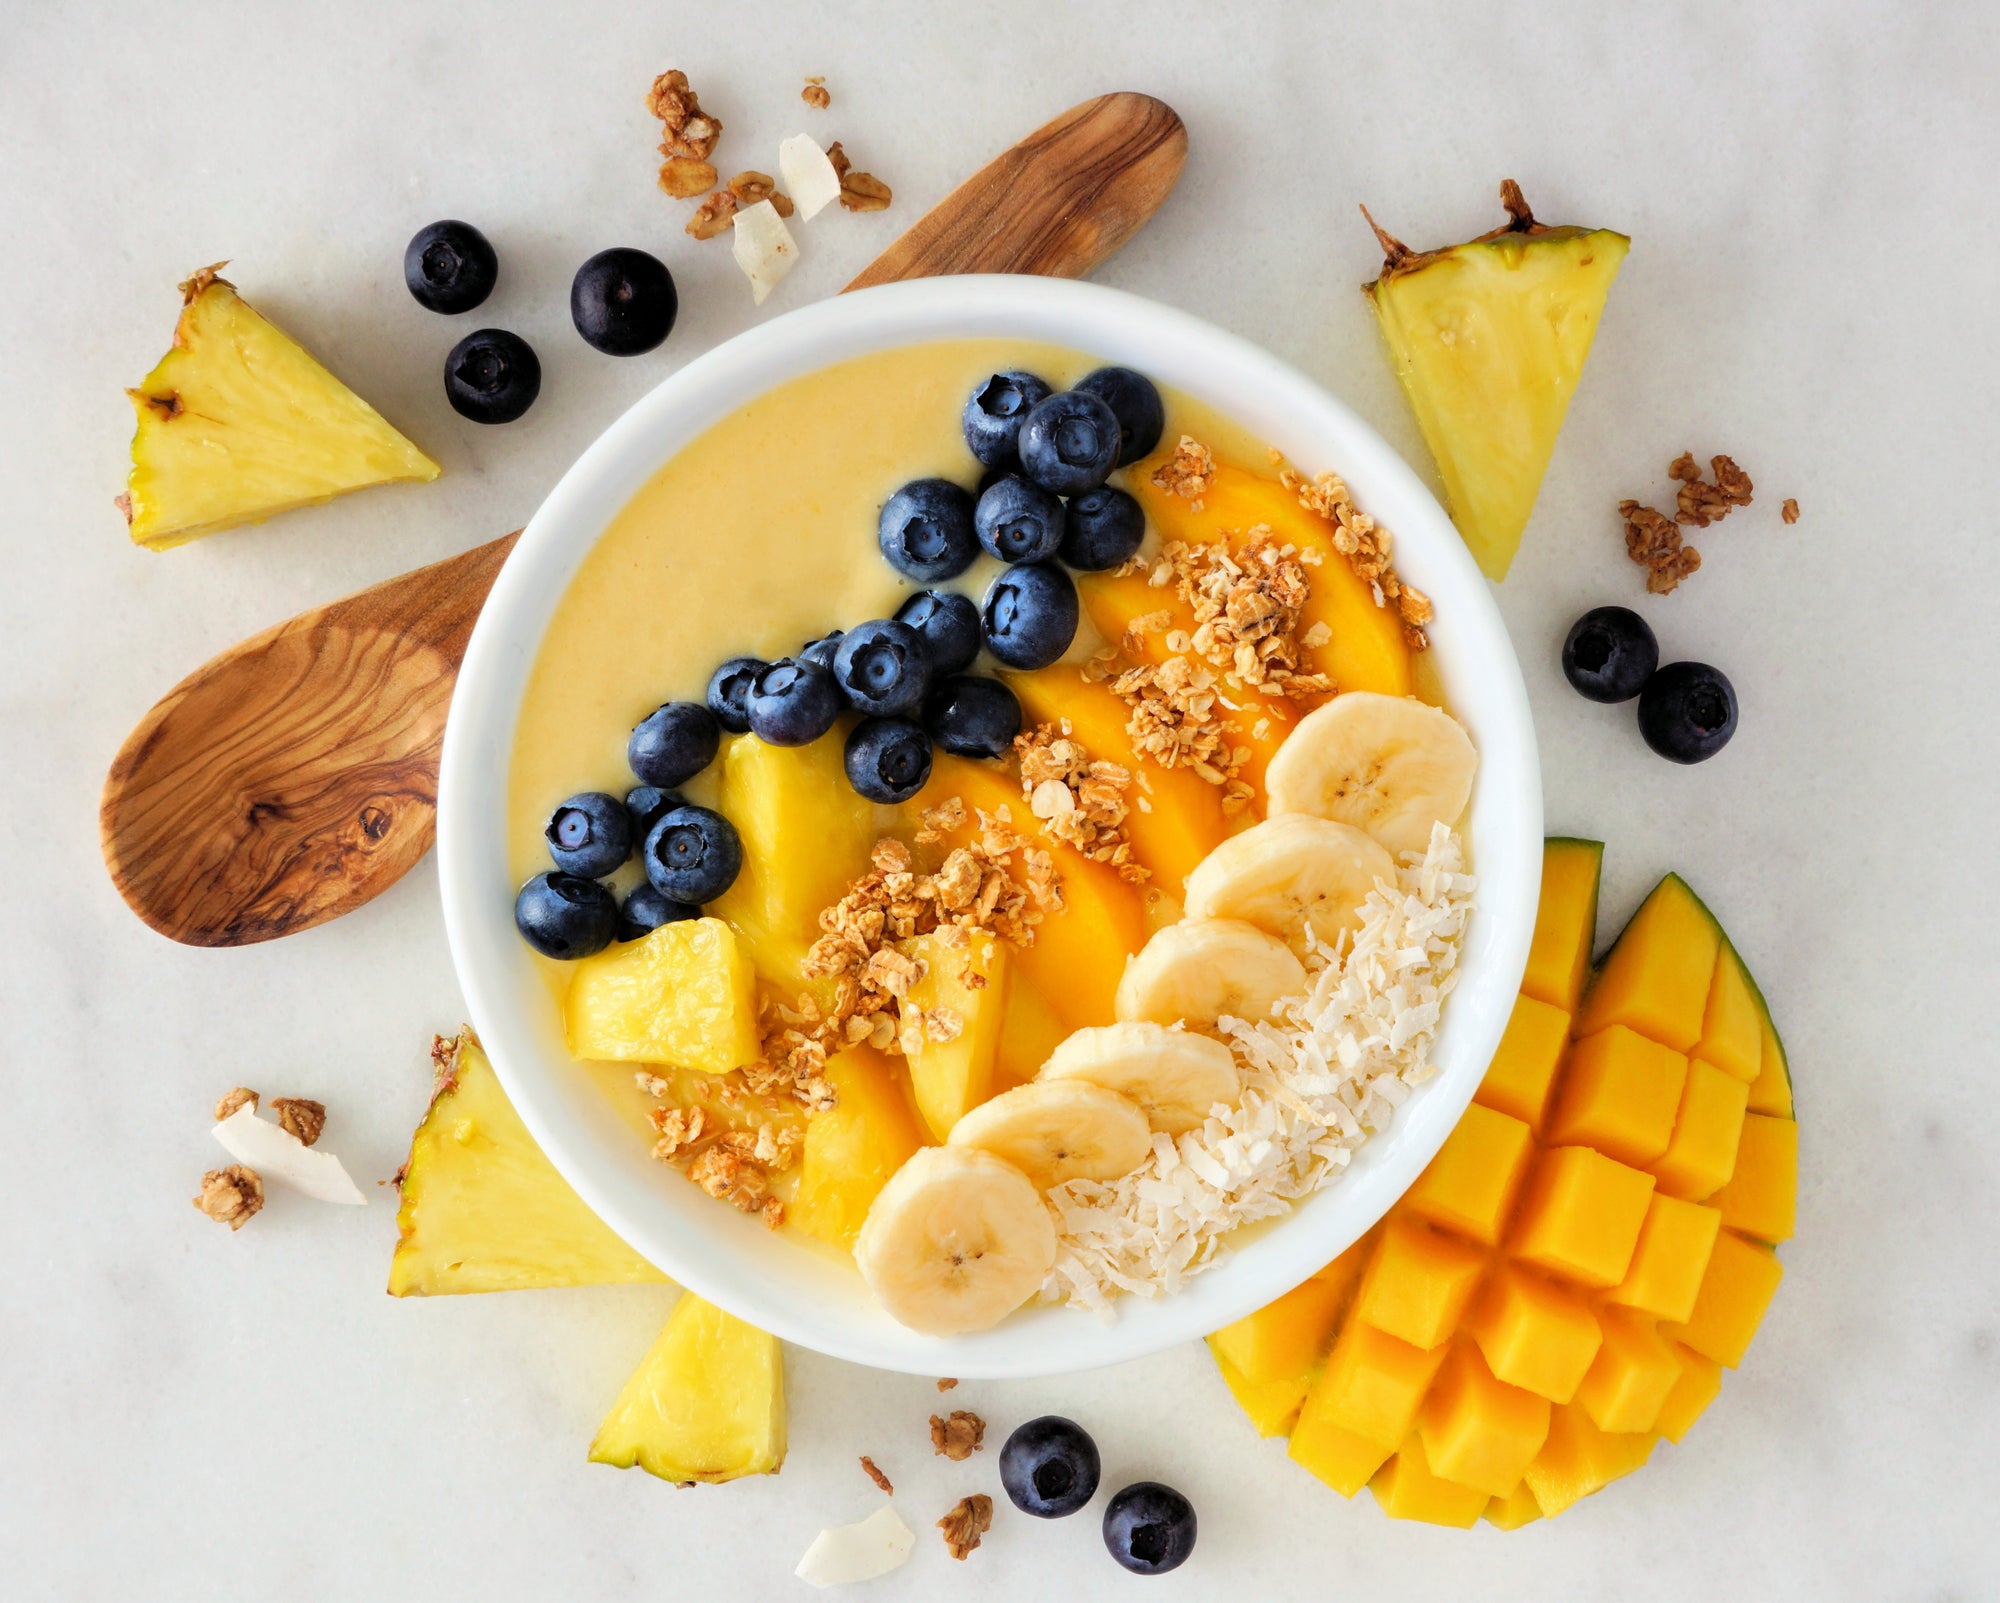 top view shot of a bowl of yellow smoothie topped with blueberries, slices of mango, banana, mango, and sprinkled with granola and coconut shreds. On the surface is a slice of ripe mango, blueberries, pineapple wedges, granola, and a wooden spatula.